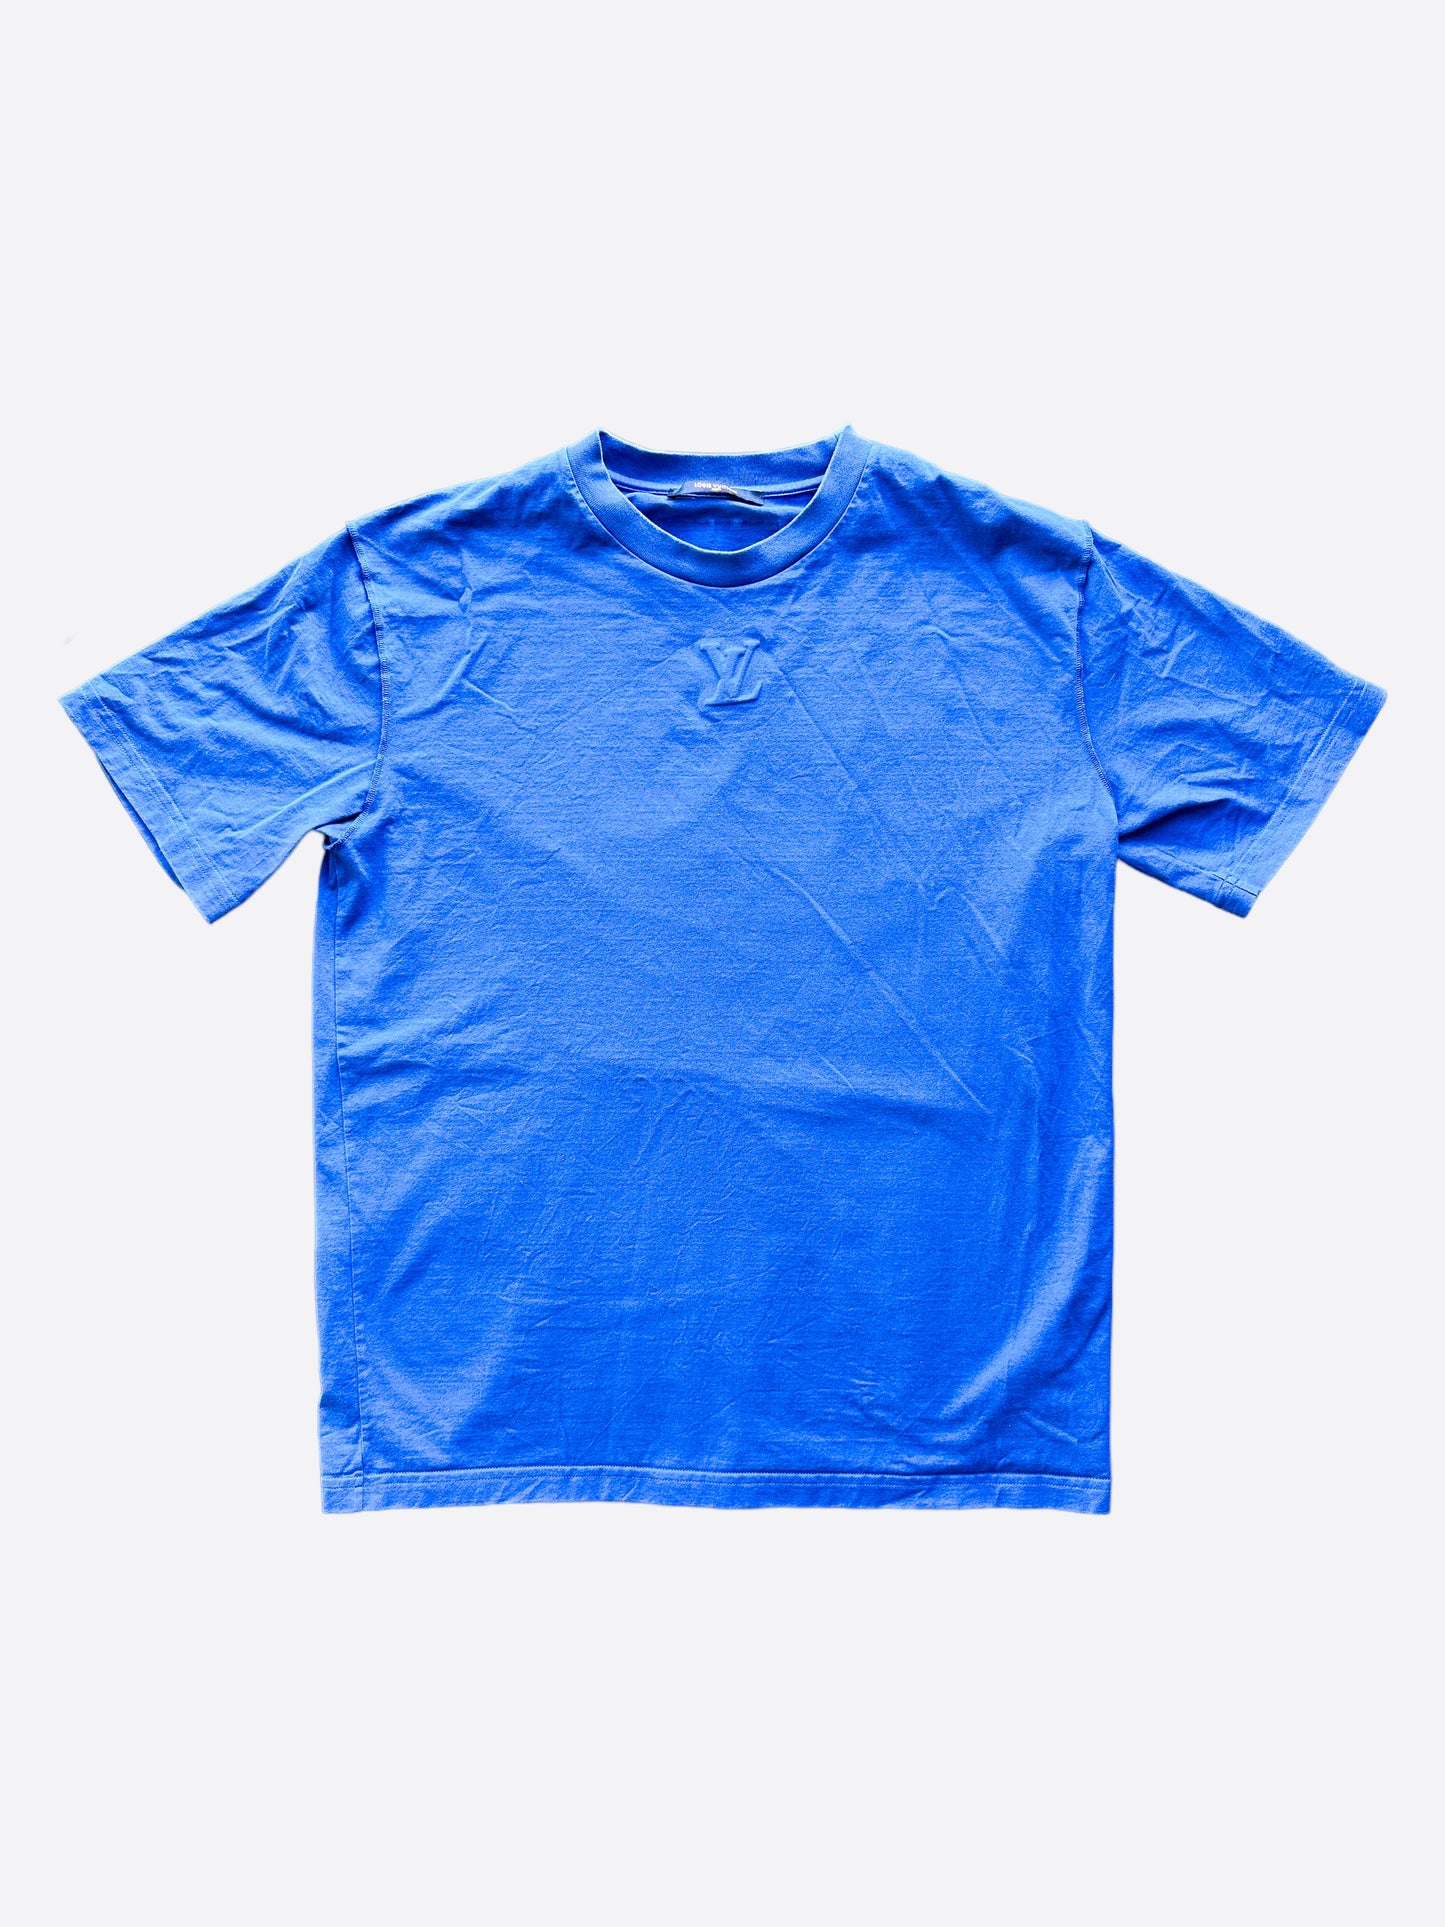 Embossed LV T-Shirt - Ready to Wear